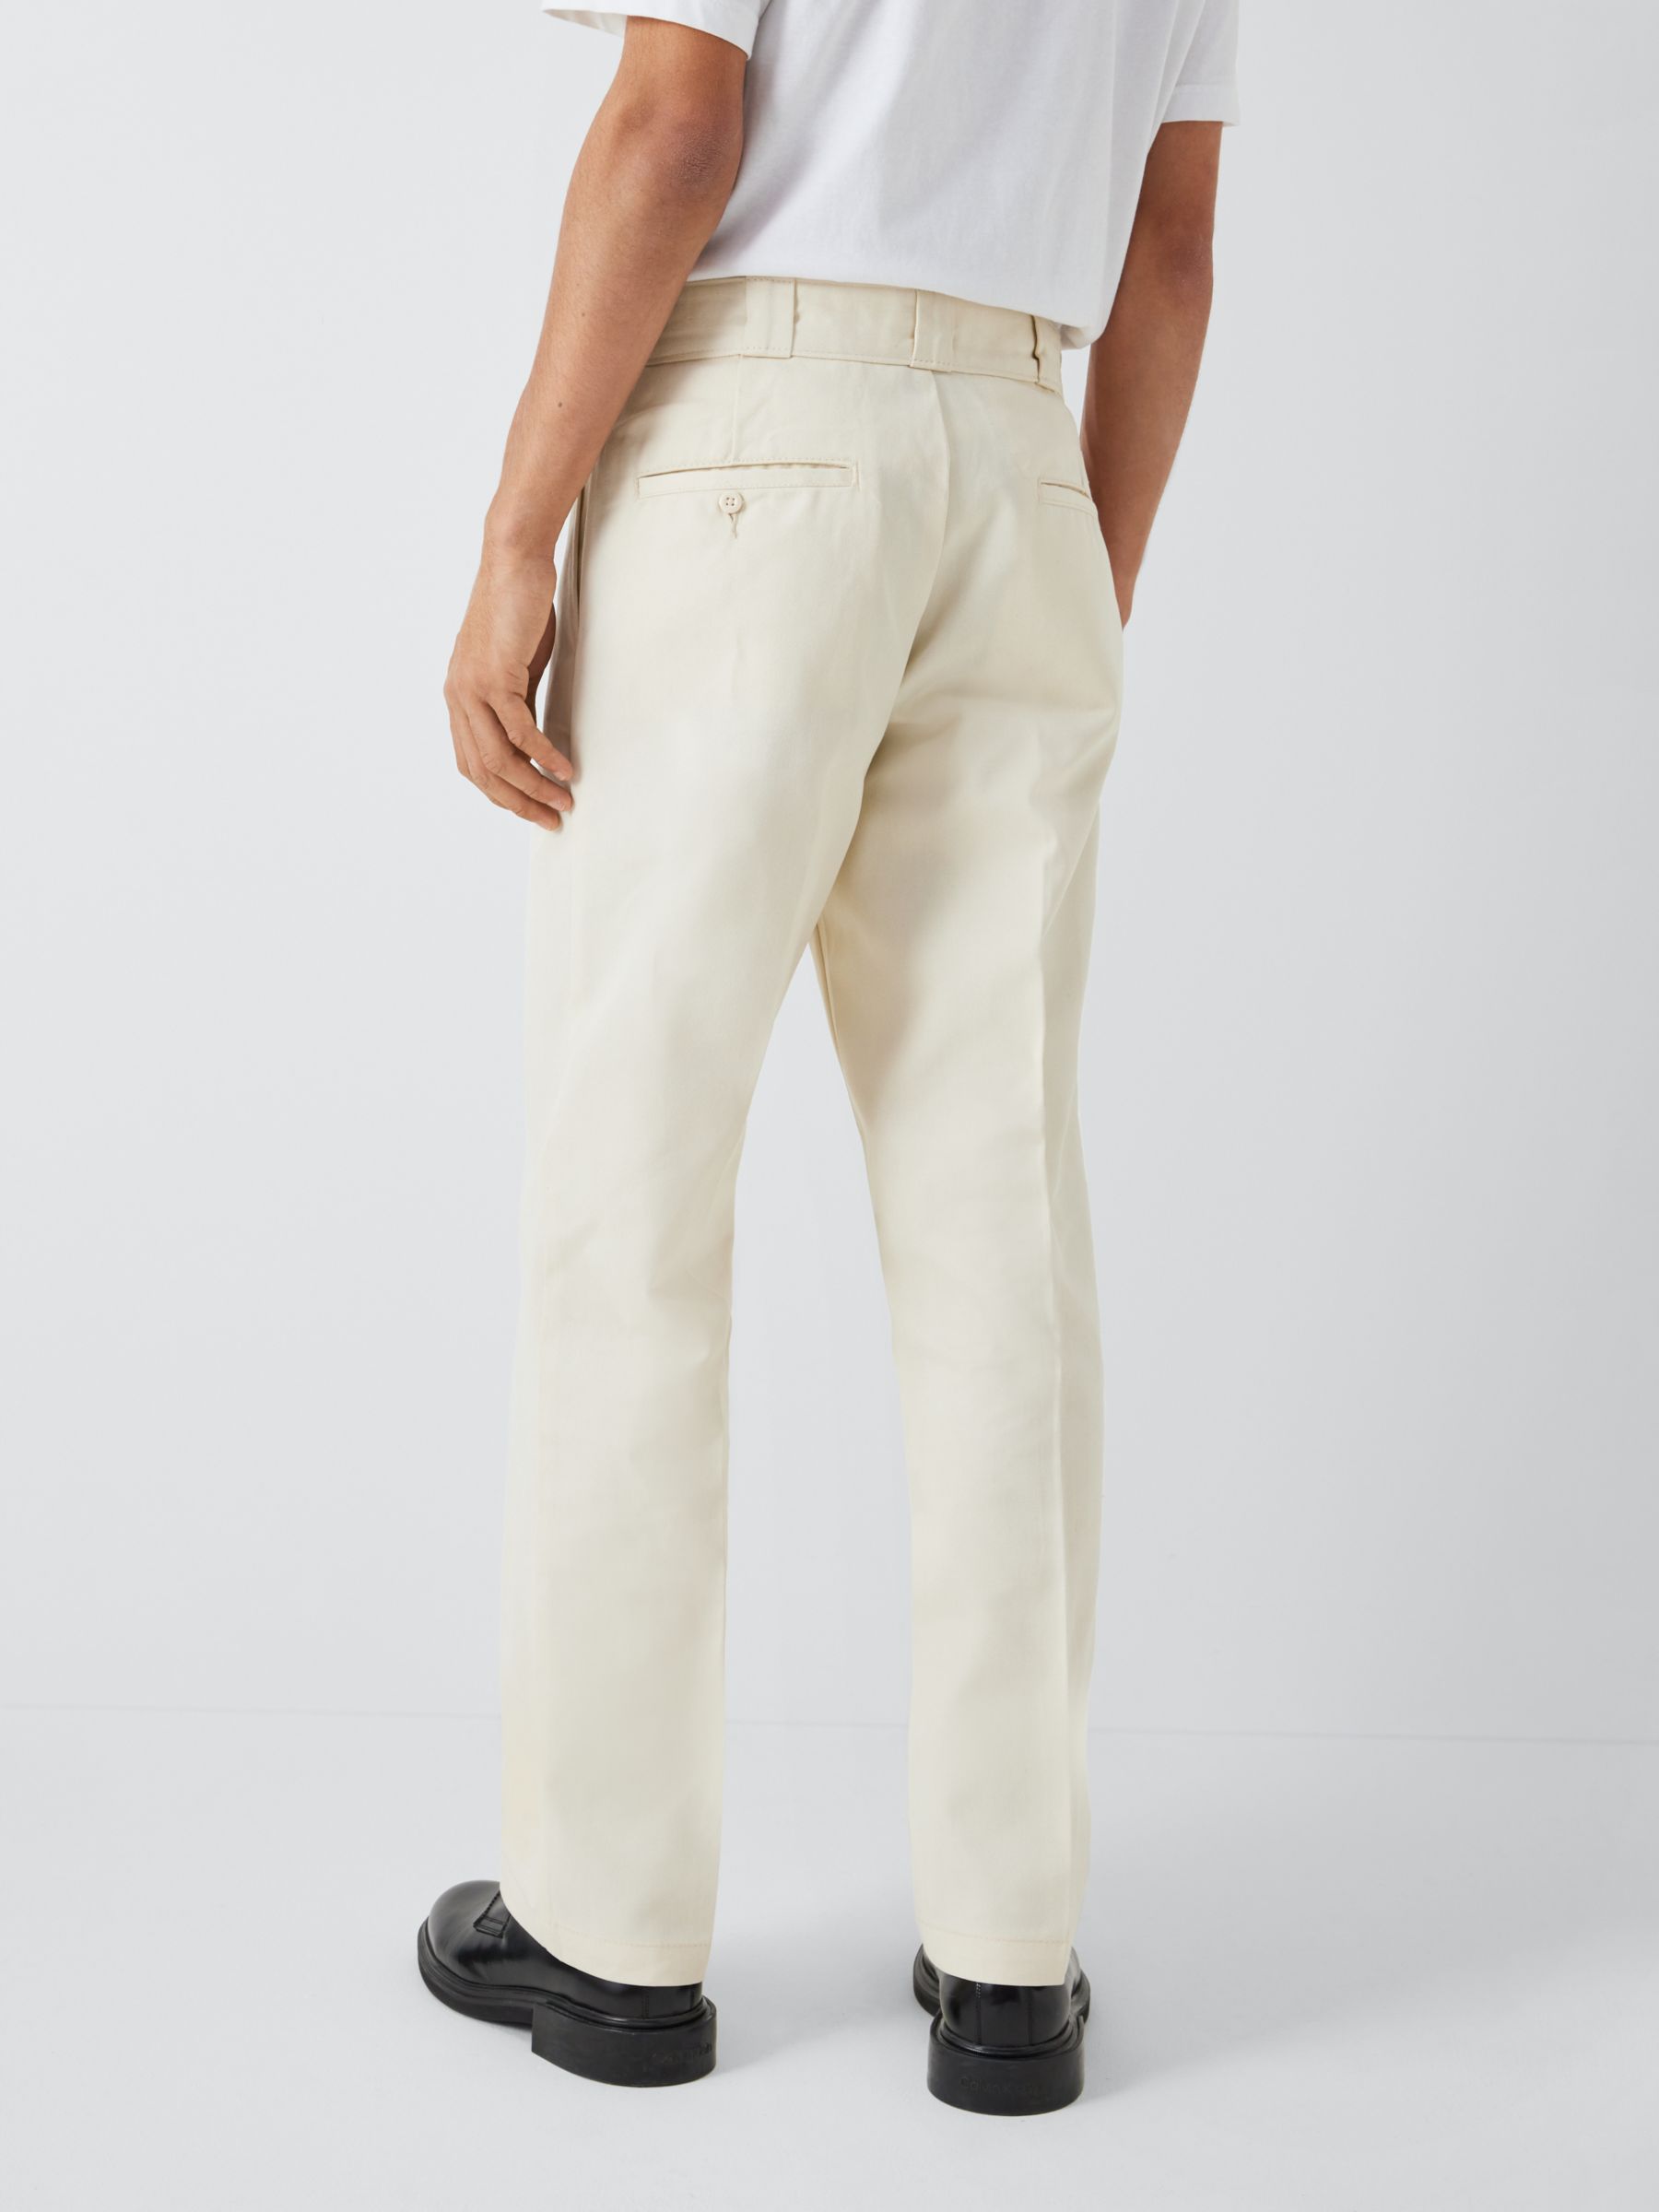 Dickies 874 Cropped Work Trousers, Whitecap Gray, 30R